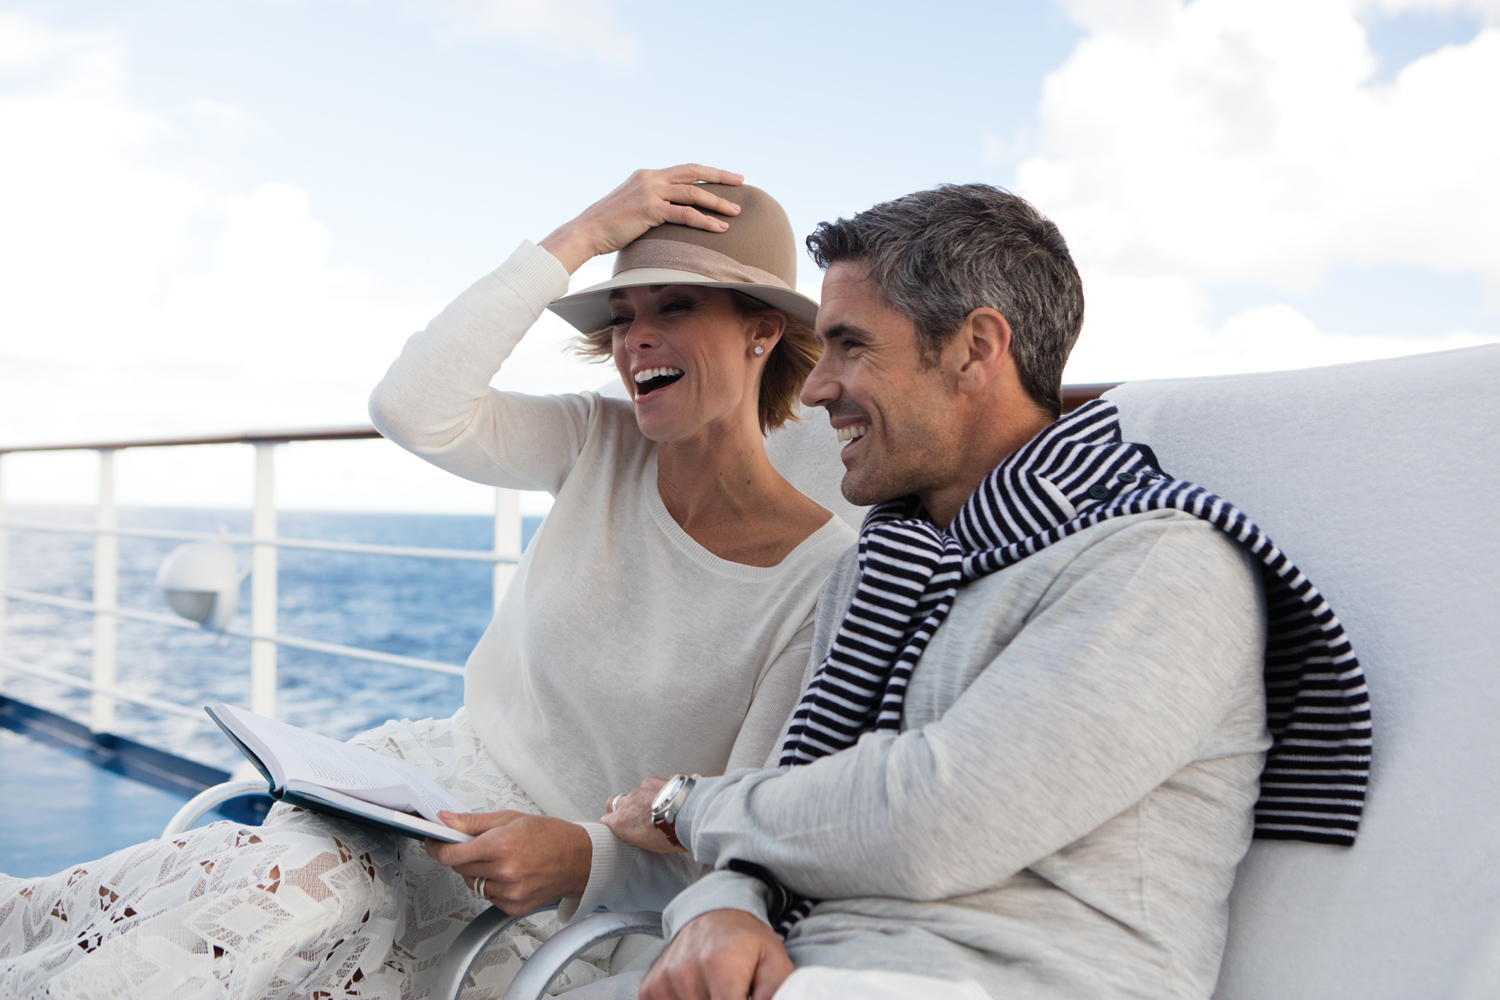 Regent Seven Seas Cruises is offering travel agents a gift card, valued up to $200, for each new 2017 Mediterranean or Alaska voyage they book.